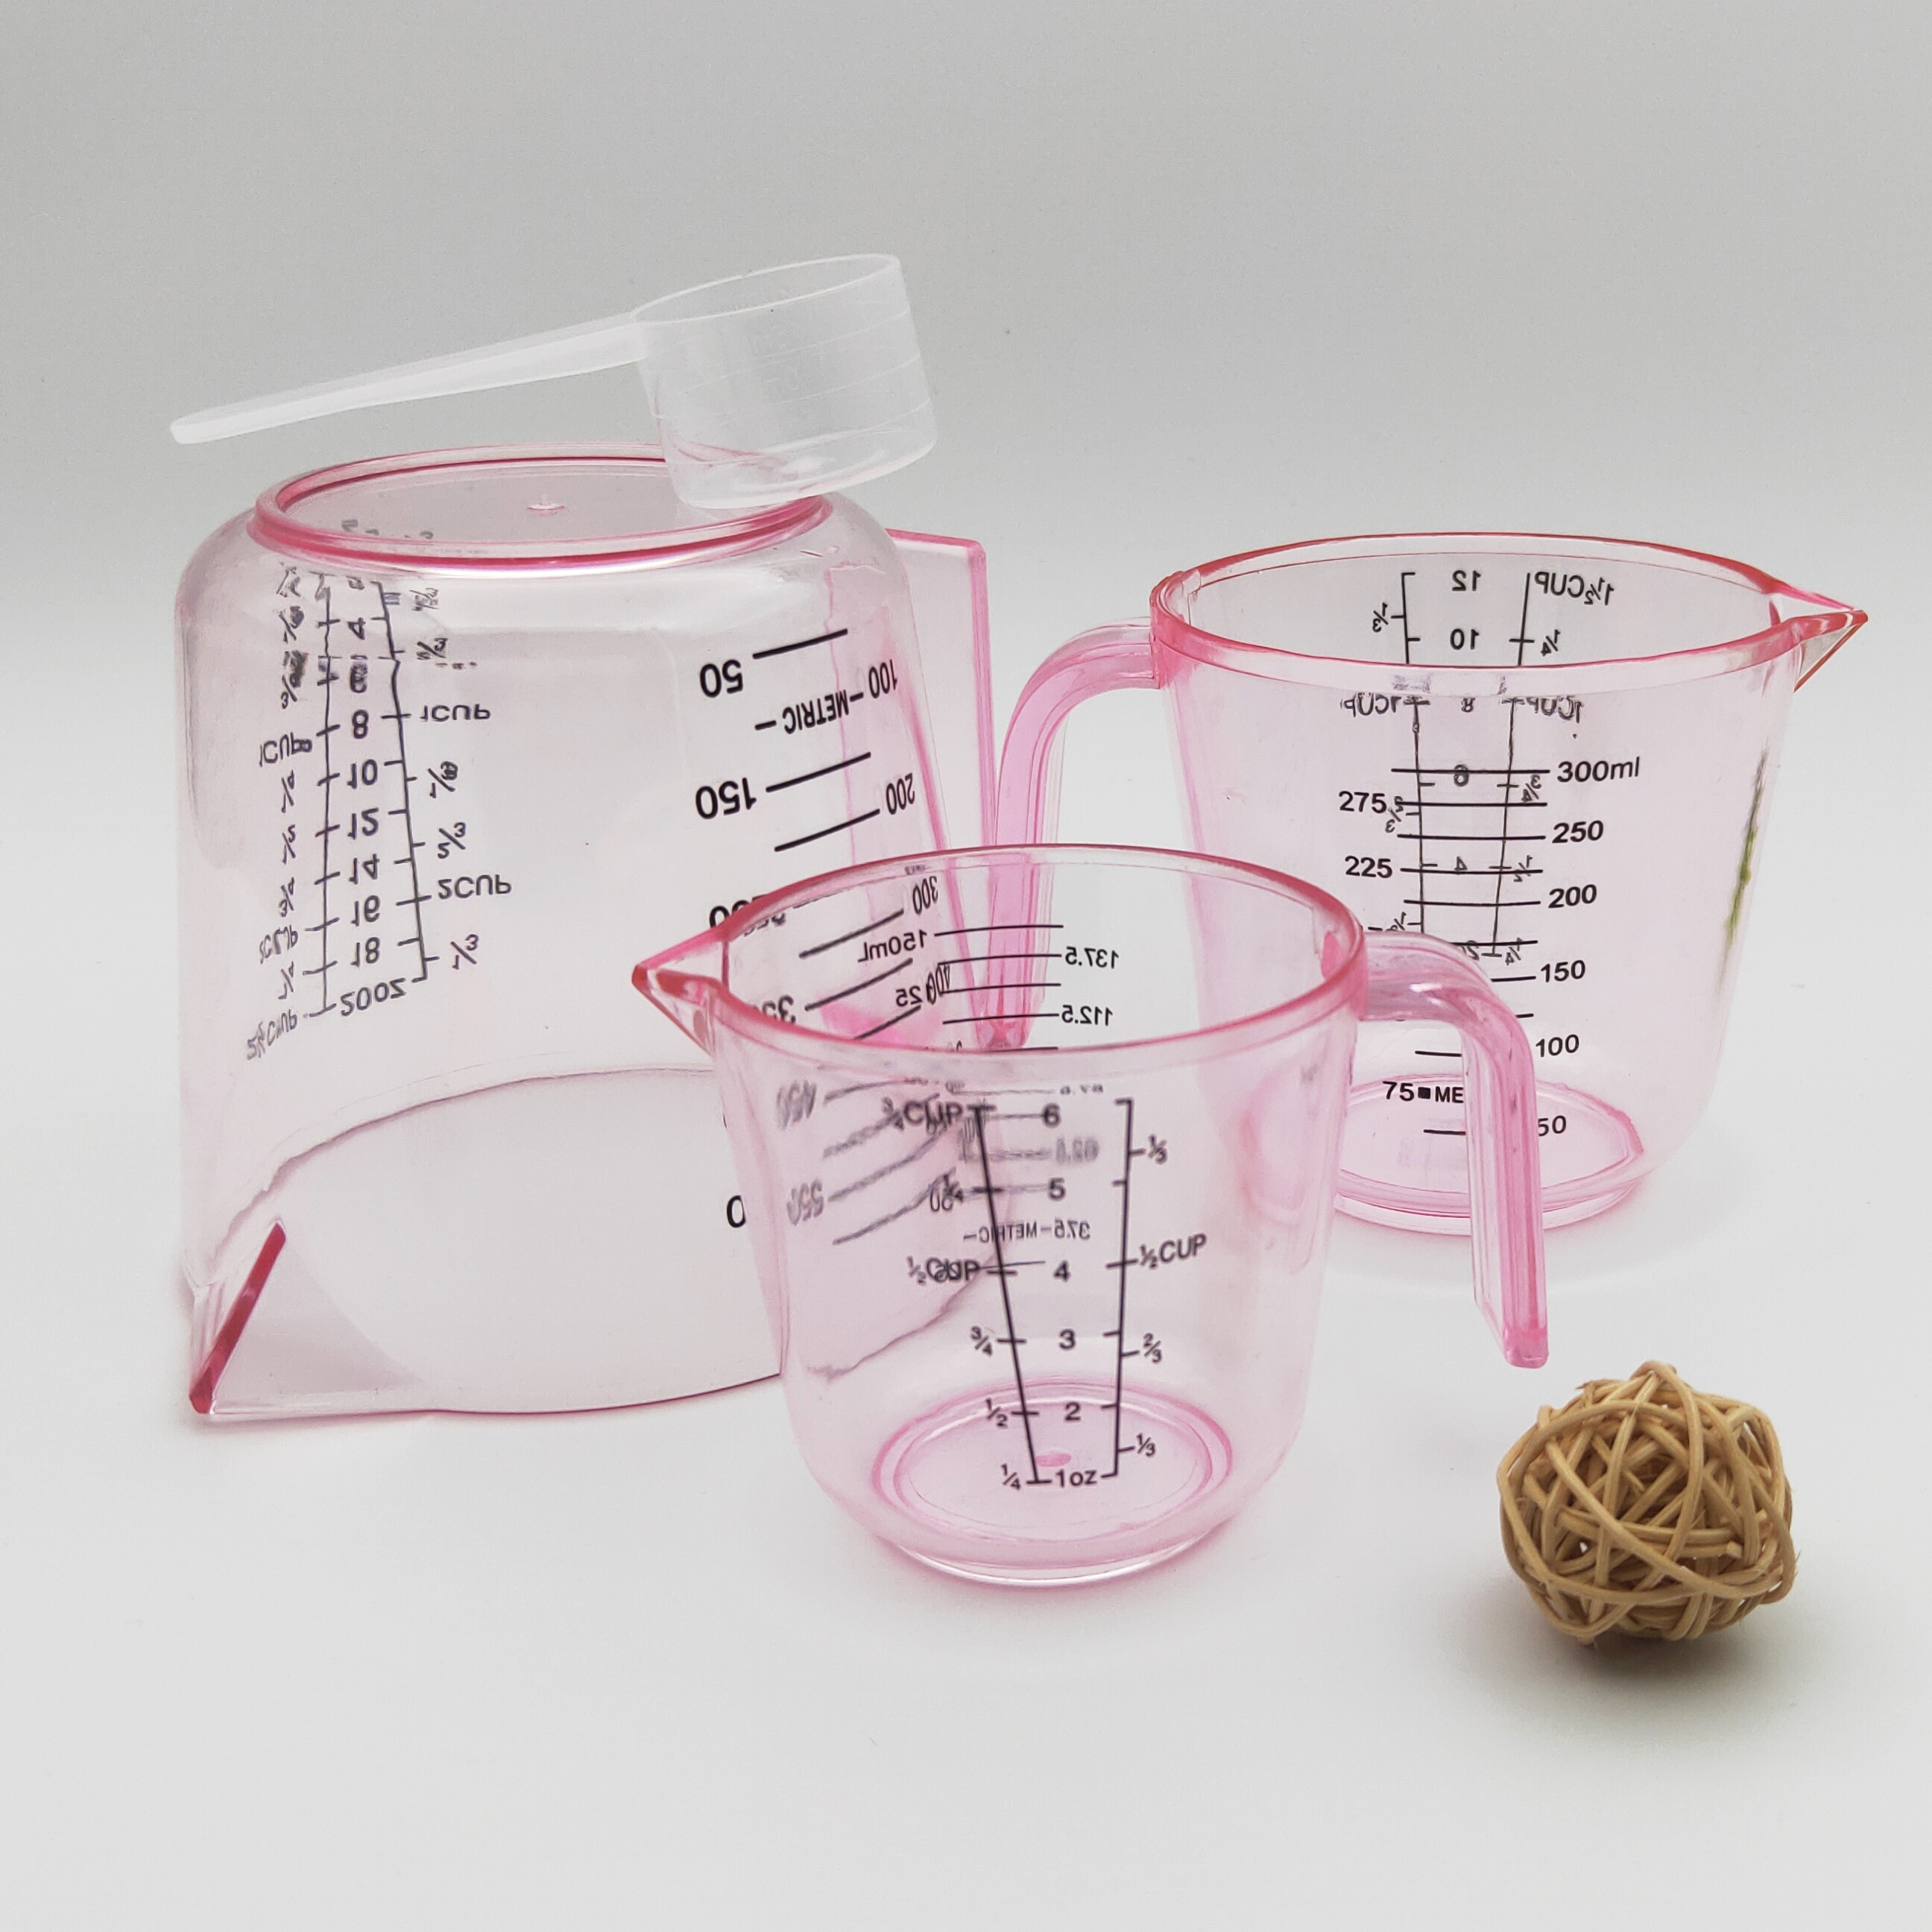 

Baking Measuring Cups Set - 4 Piece Polystyrene Stackable Kitchen Tools With Measurements In Ml/oz/cup - Includes 6oz, 12oz, 20oz Cups And 20ml Measuring Spoon (pink)